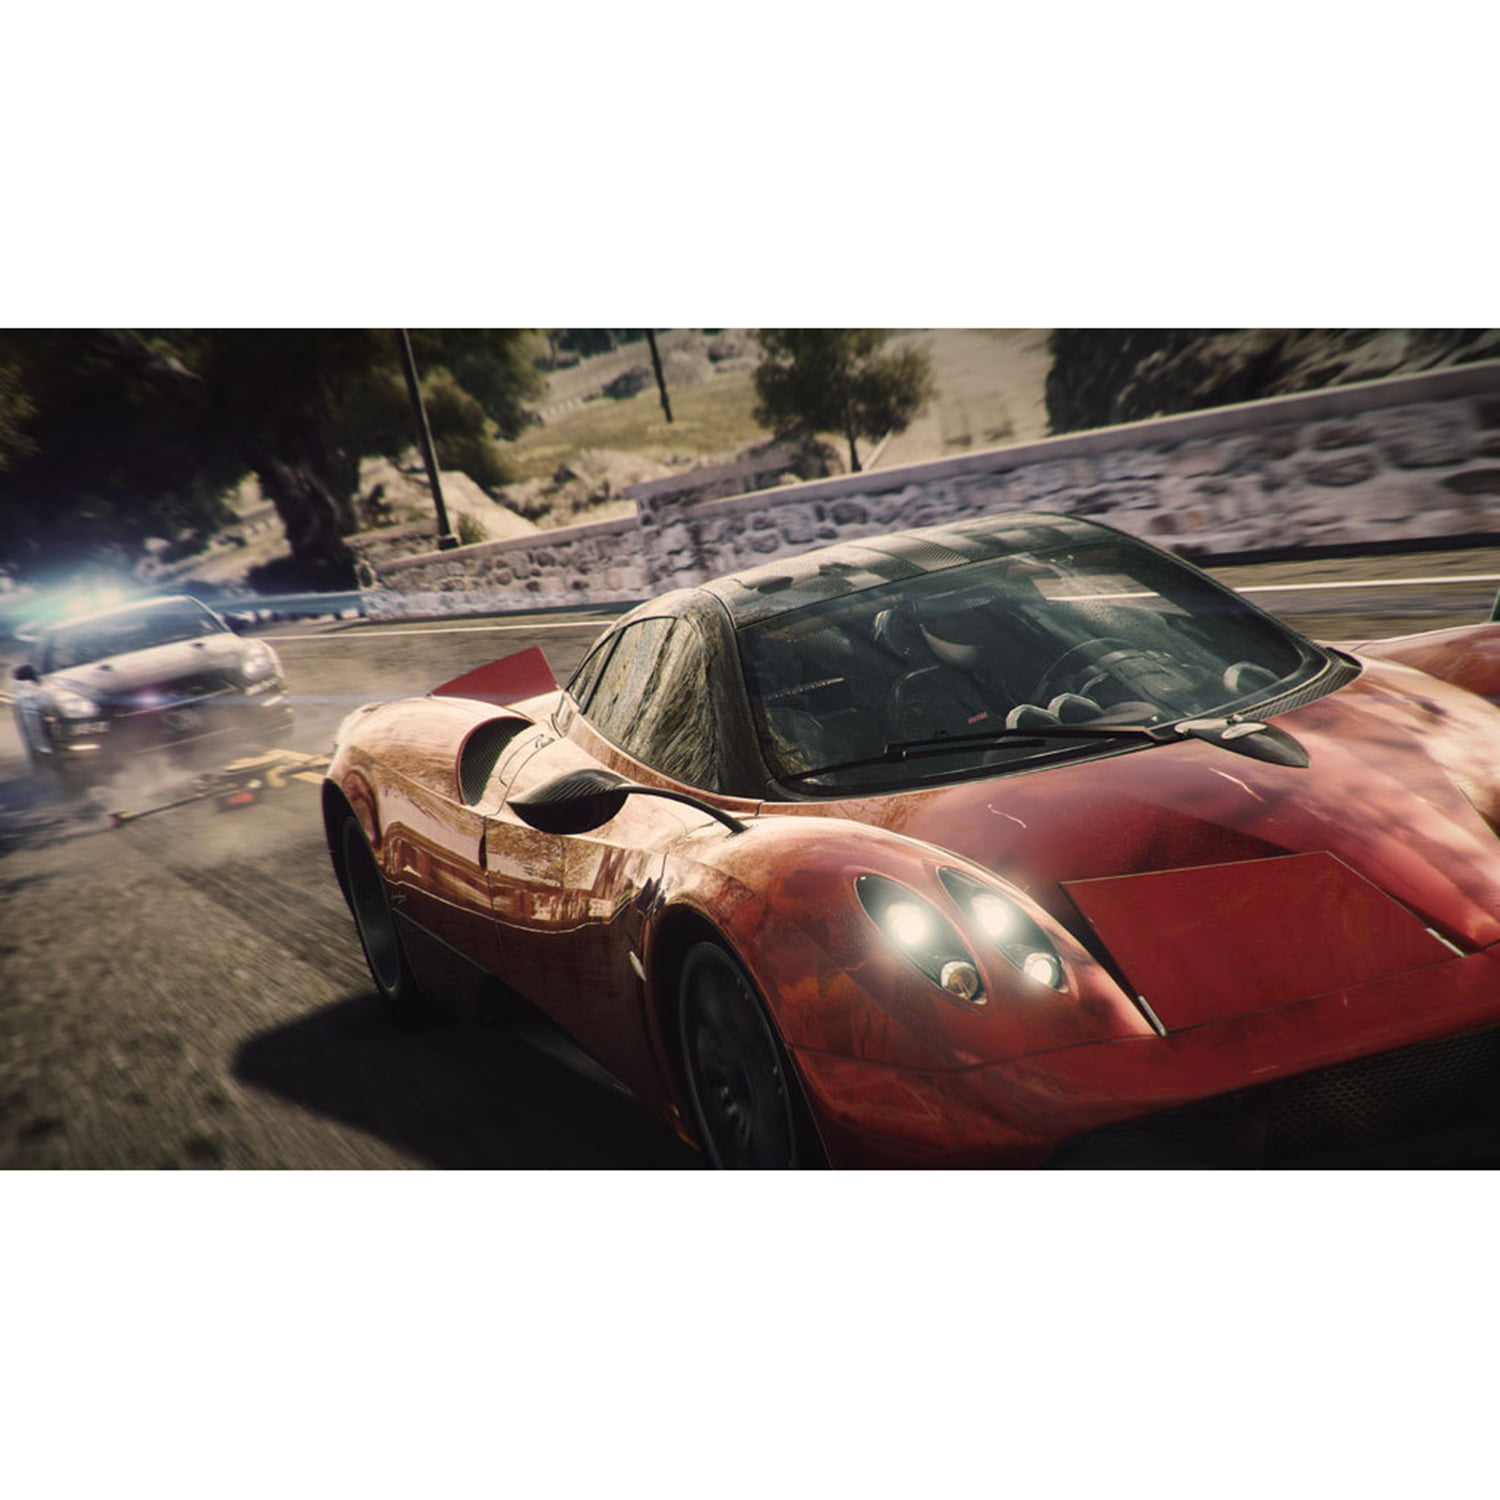 Sony PlayStation 4 Need for Speed: Rivals Video Game 